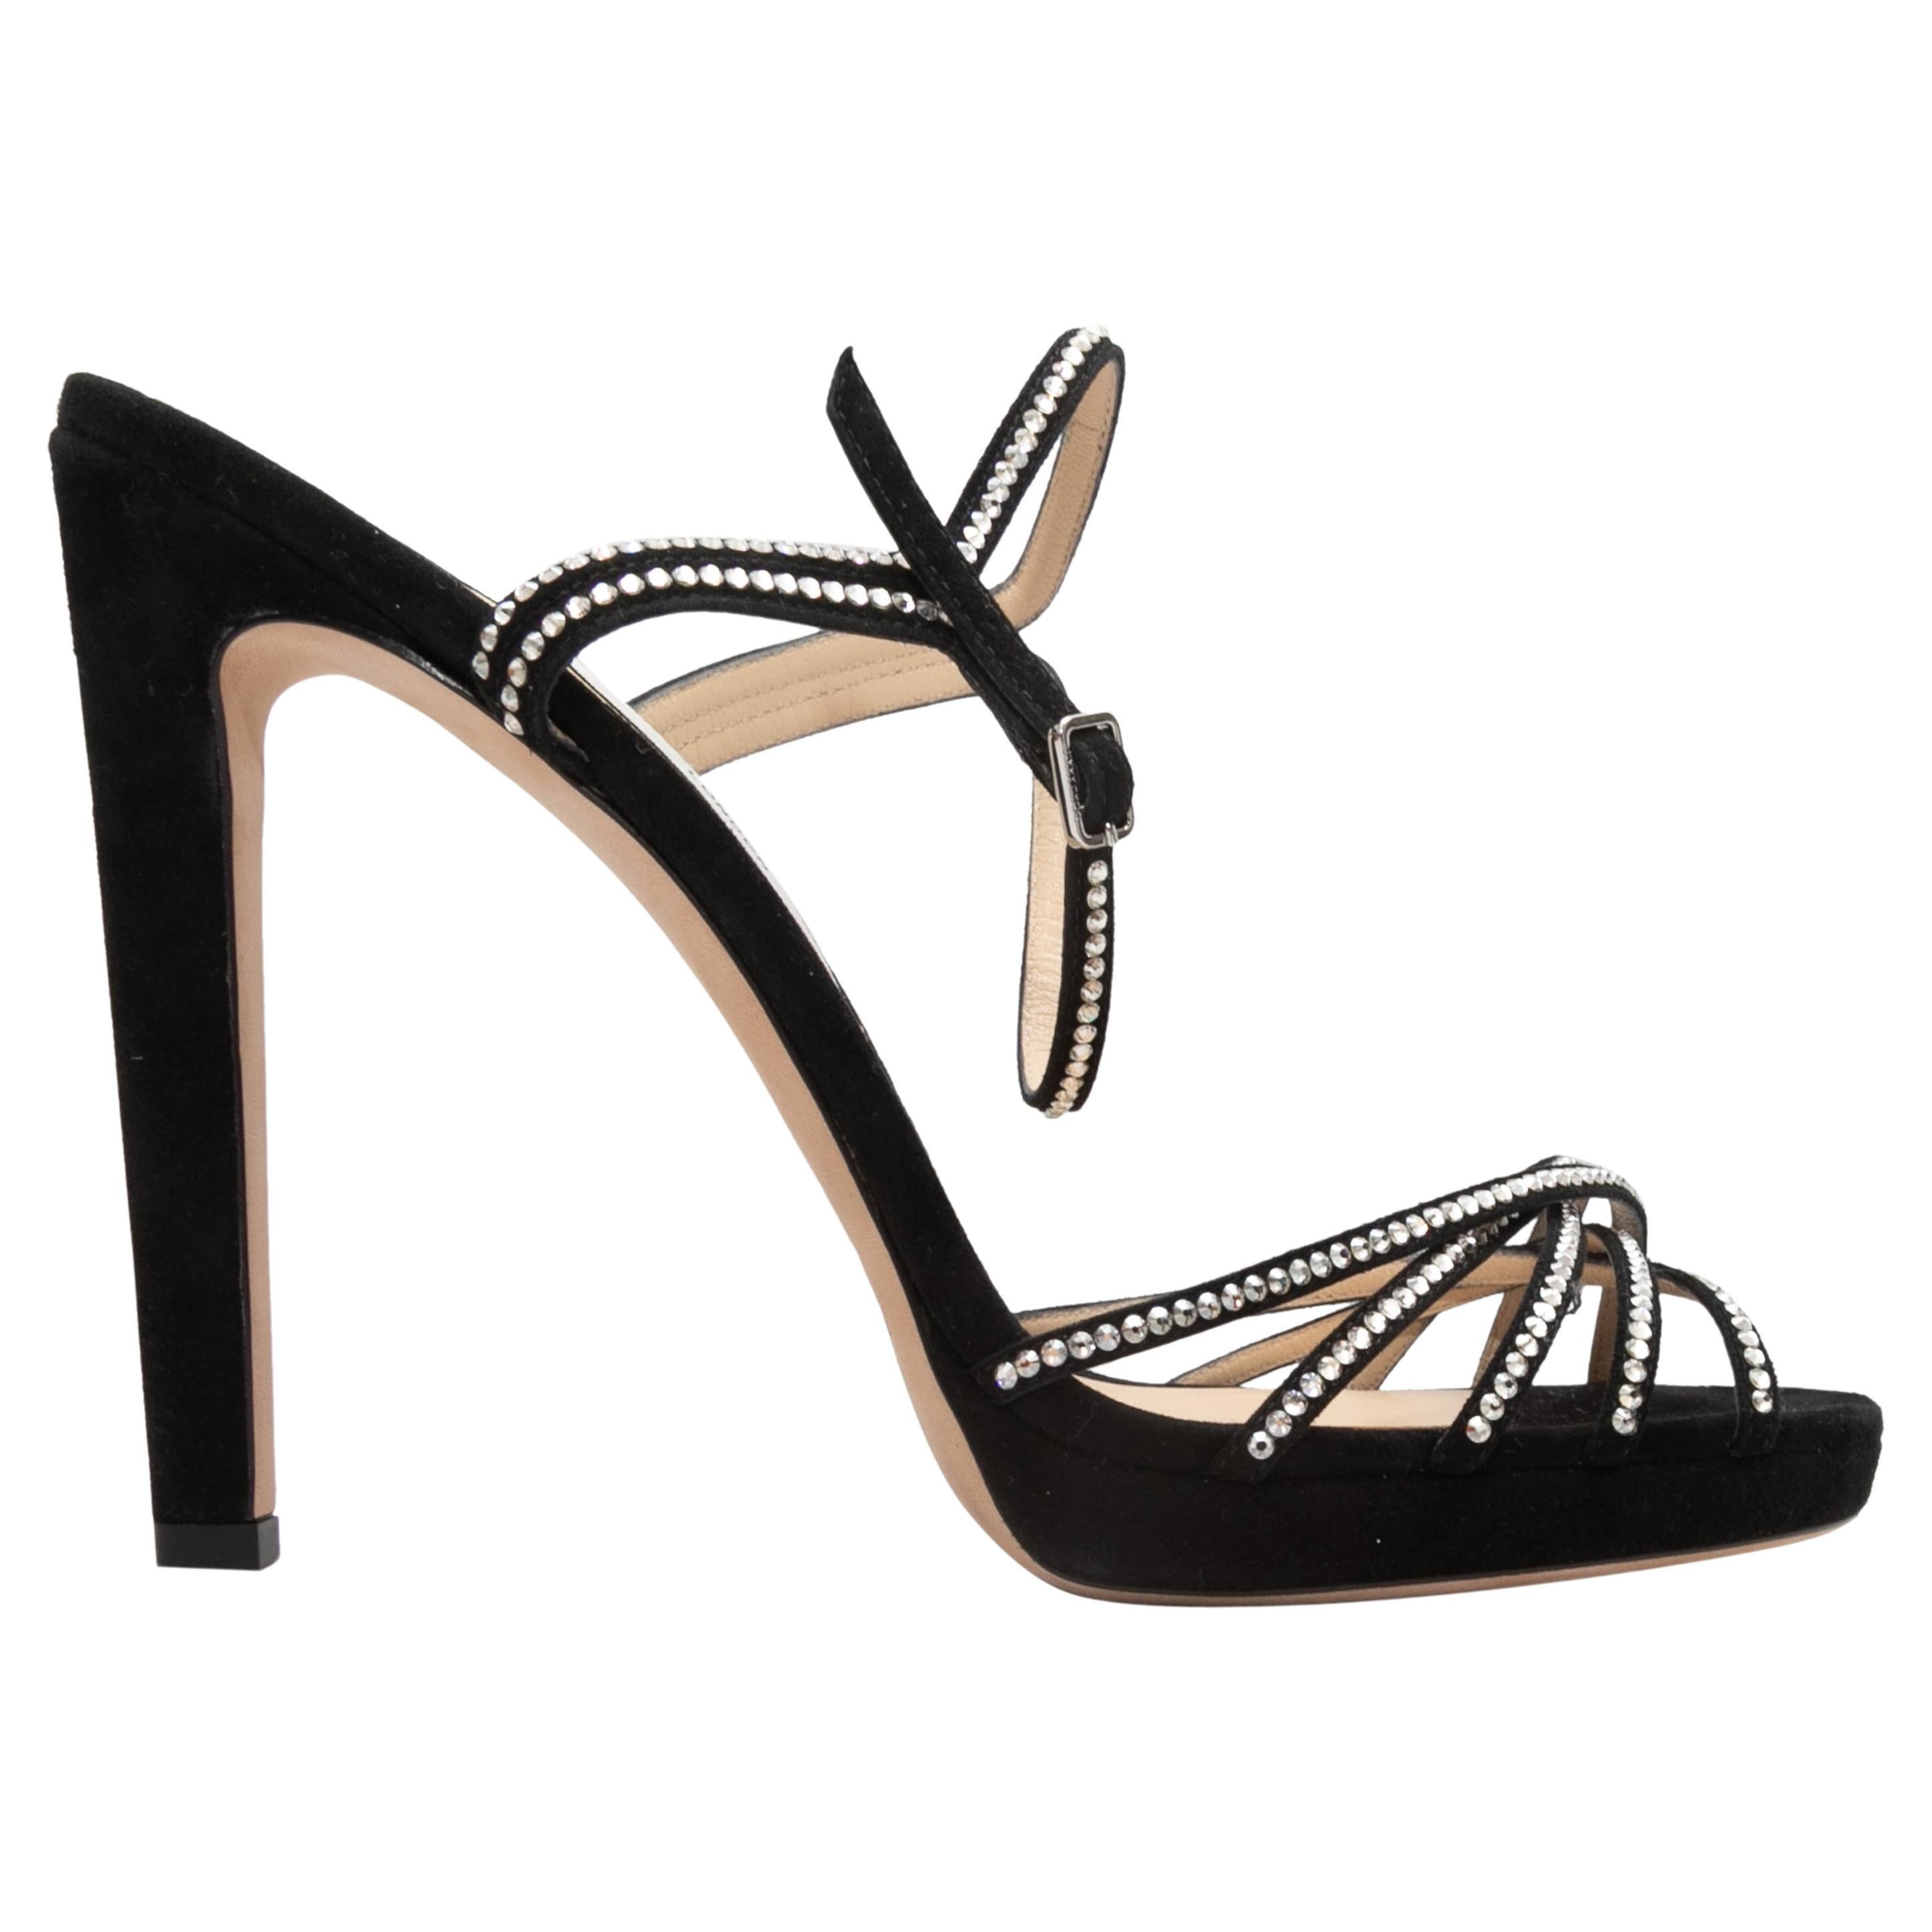 JIMMY CHOO: Aveline sandals in laminated patent leather with maxi bow -  Silver | JIMMY CHOO heeled sandals AVELINE100BAT online at GIGLIO.COM